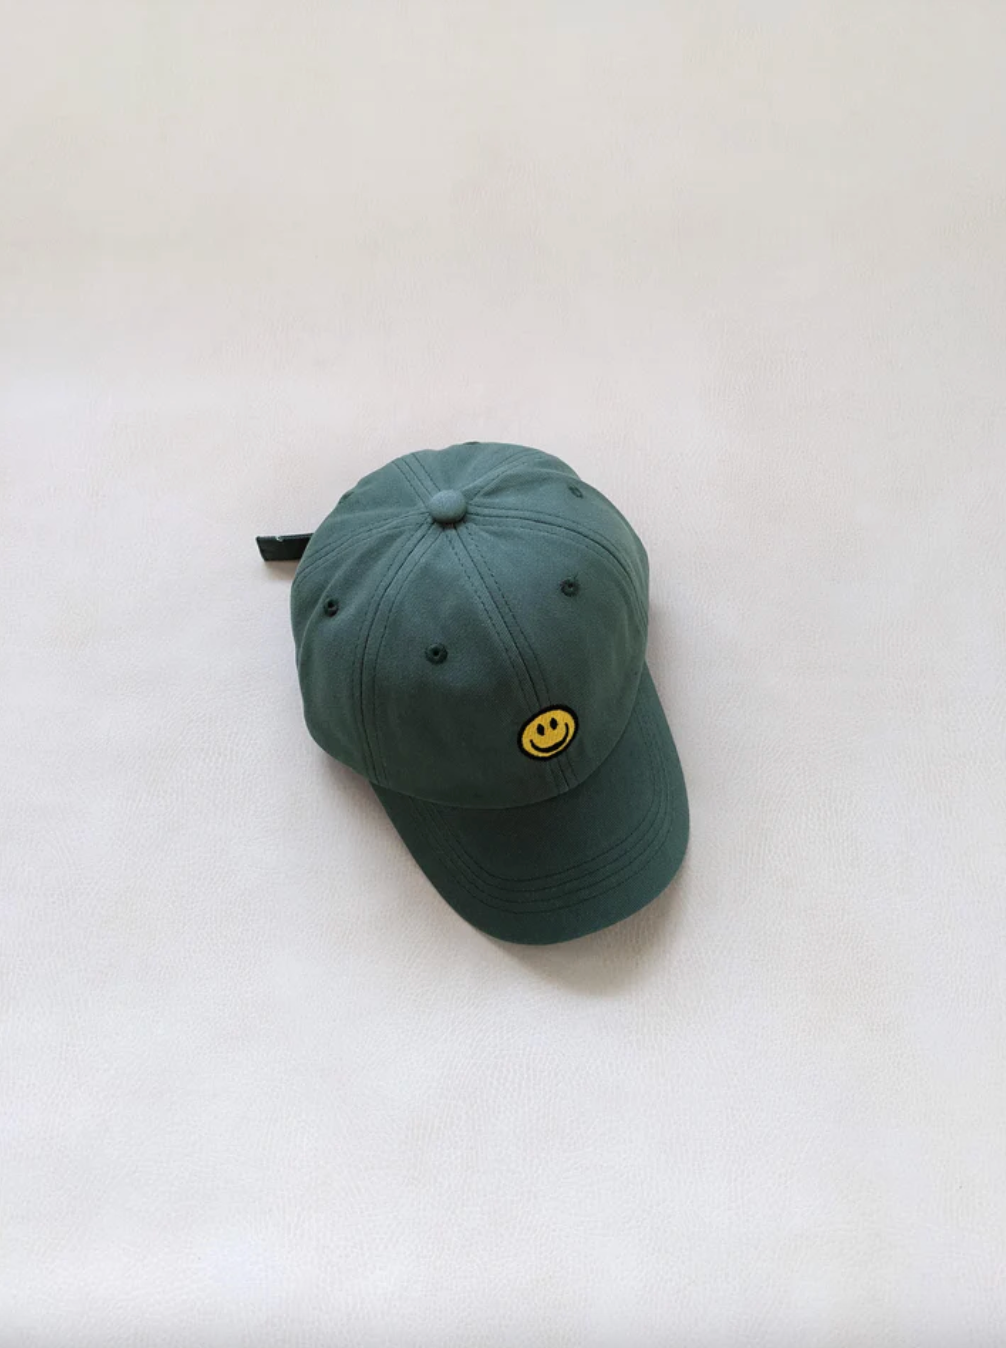 Tiny Trove - Smiley Embroidery Cap - Forest